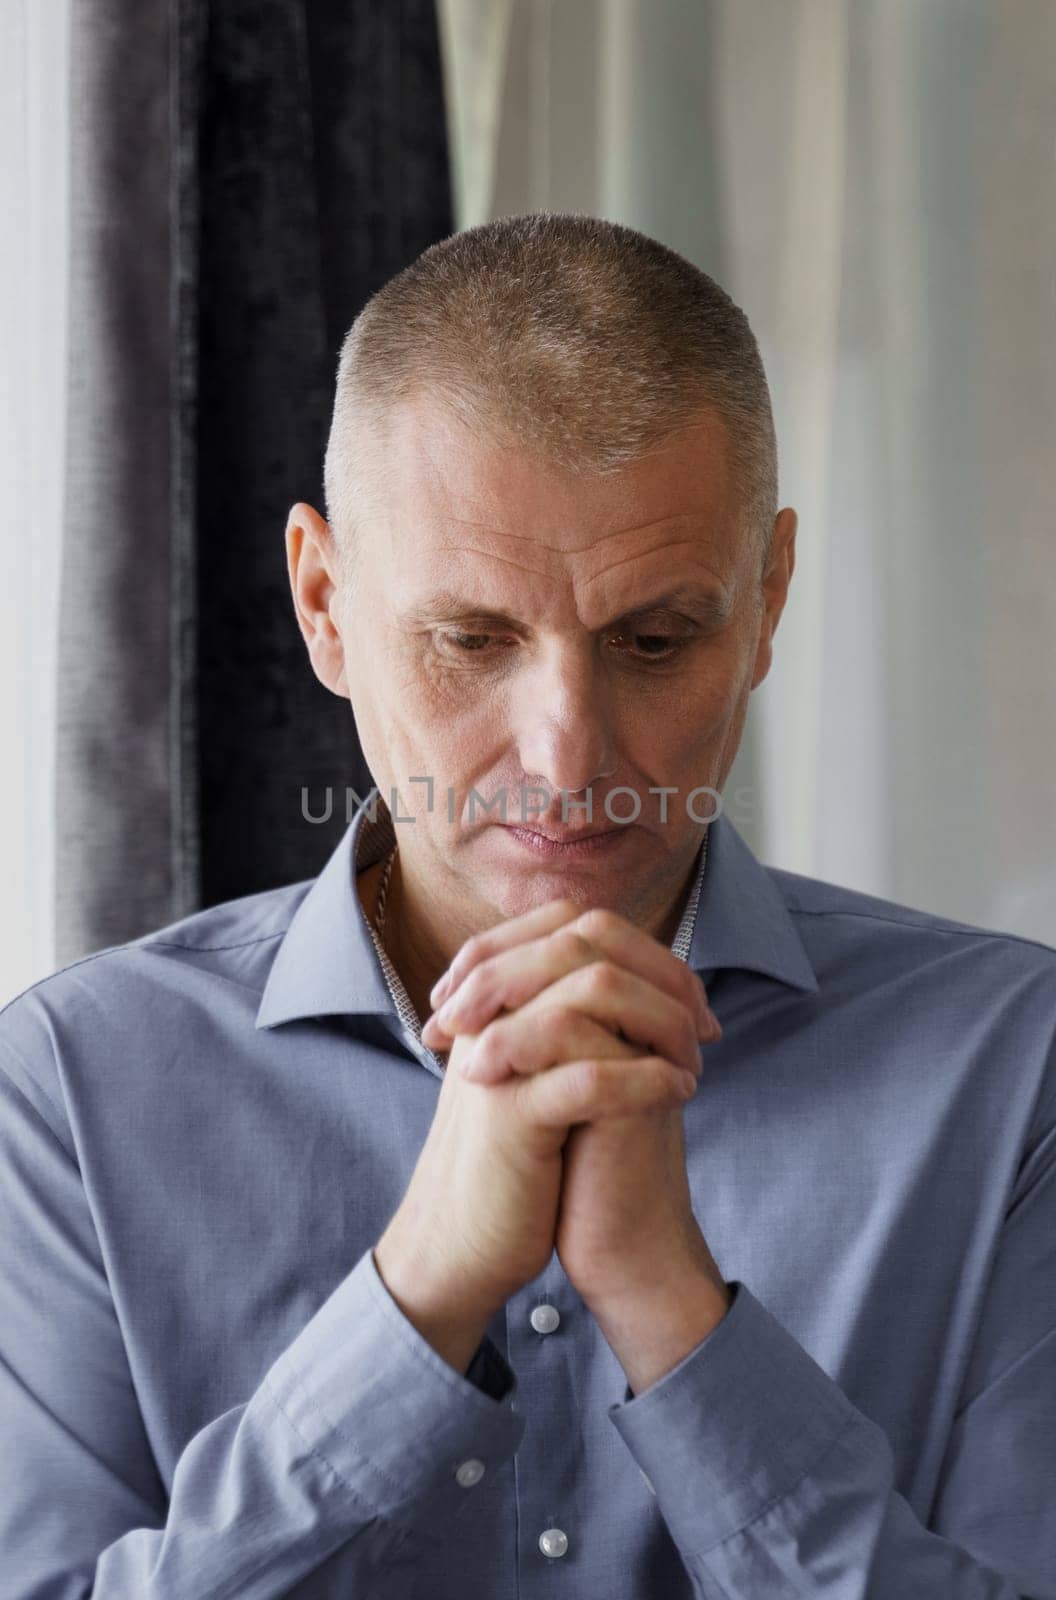 Portrait of a man who stands at the window clenched his hands in front of him, concentrated, prays or thinks. Vertical frame.